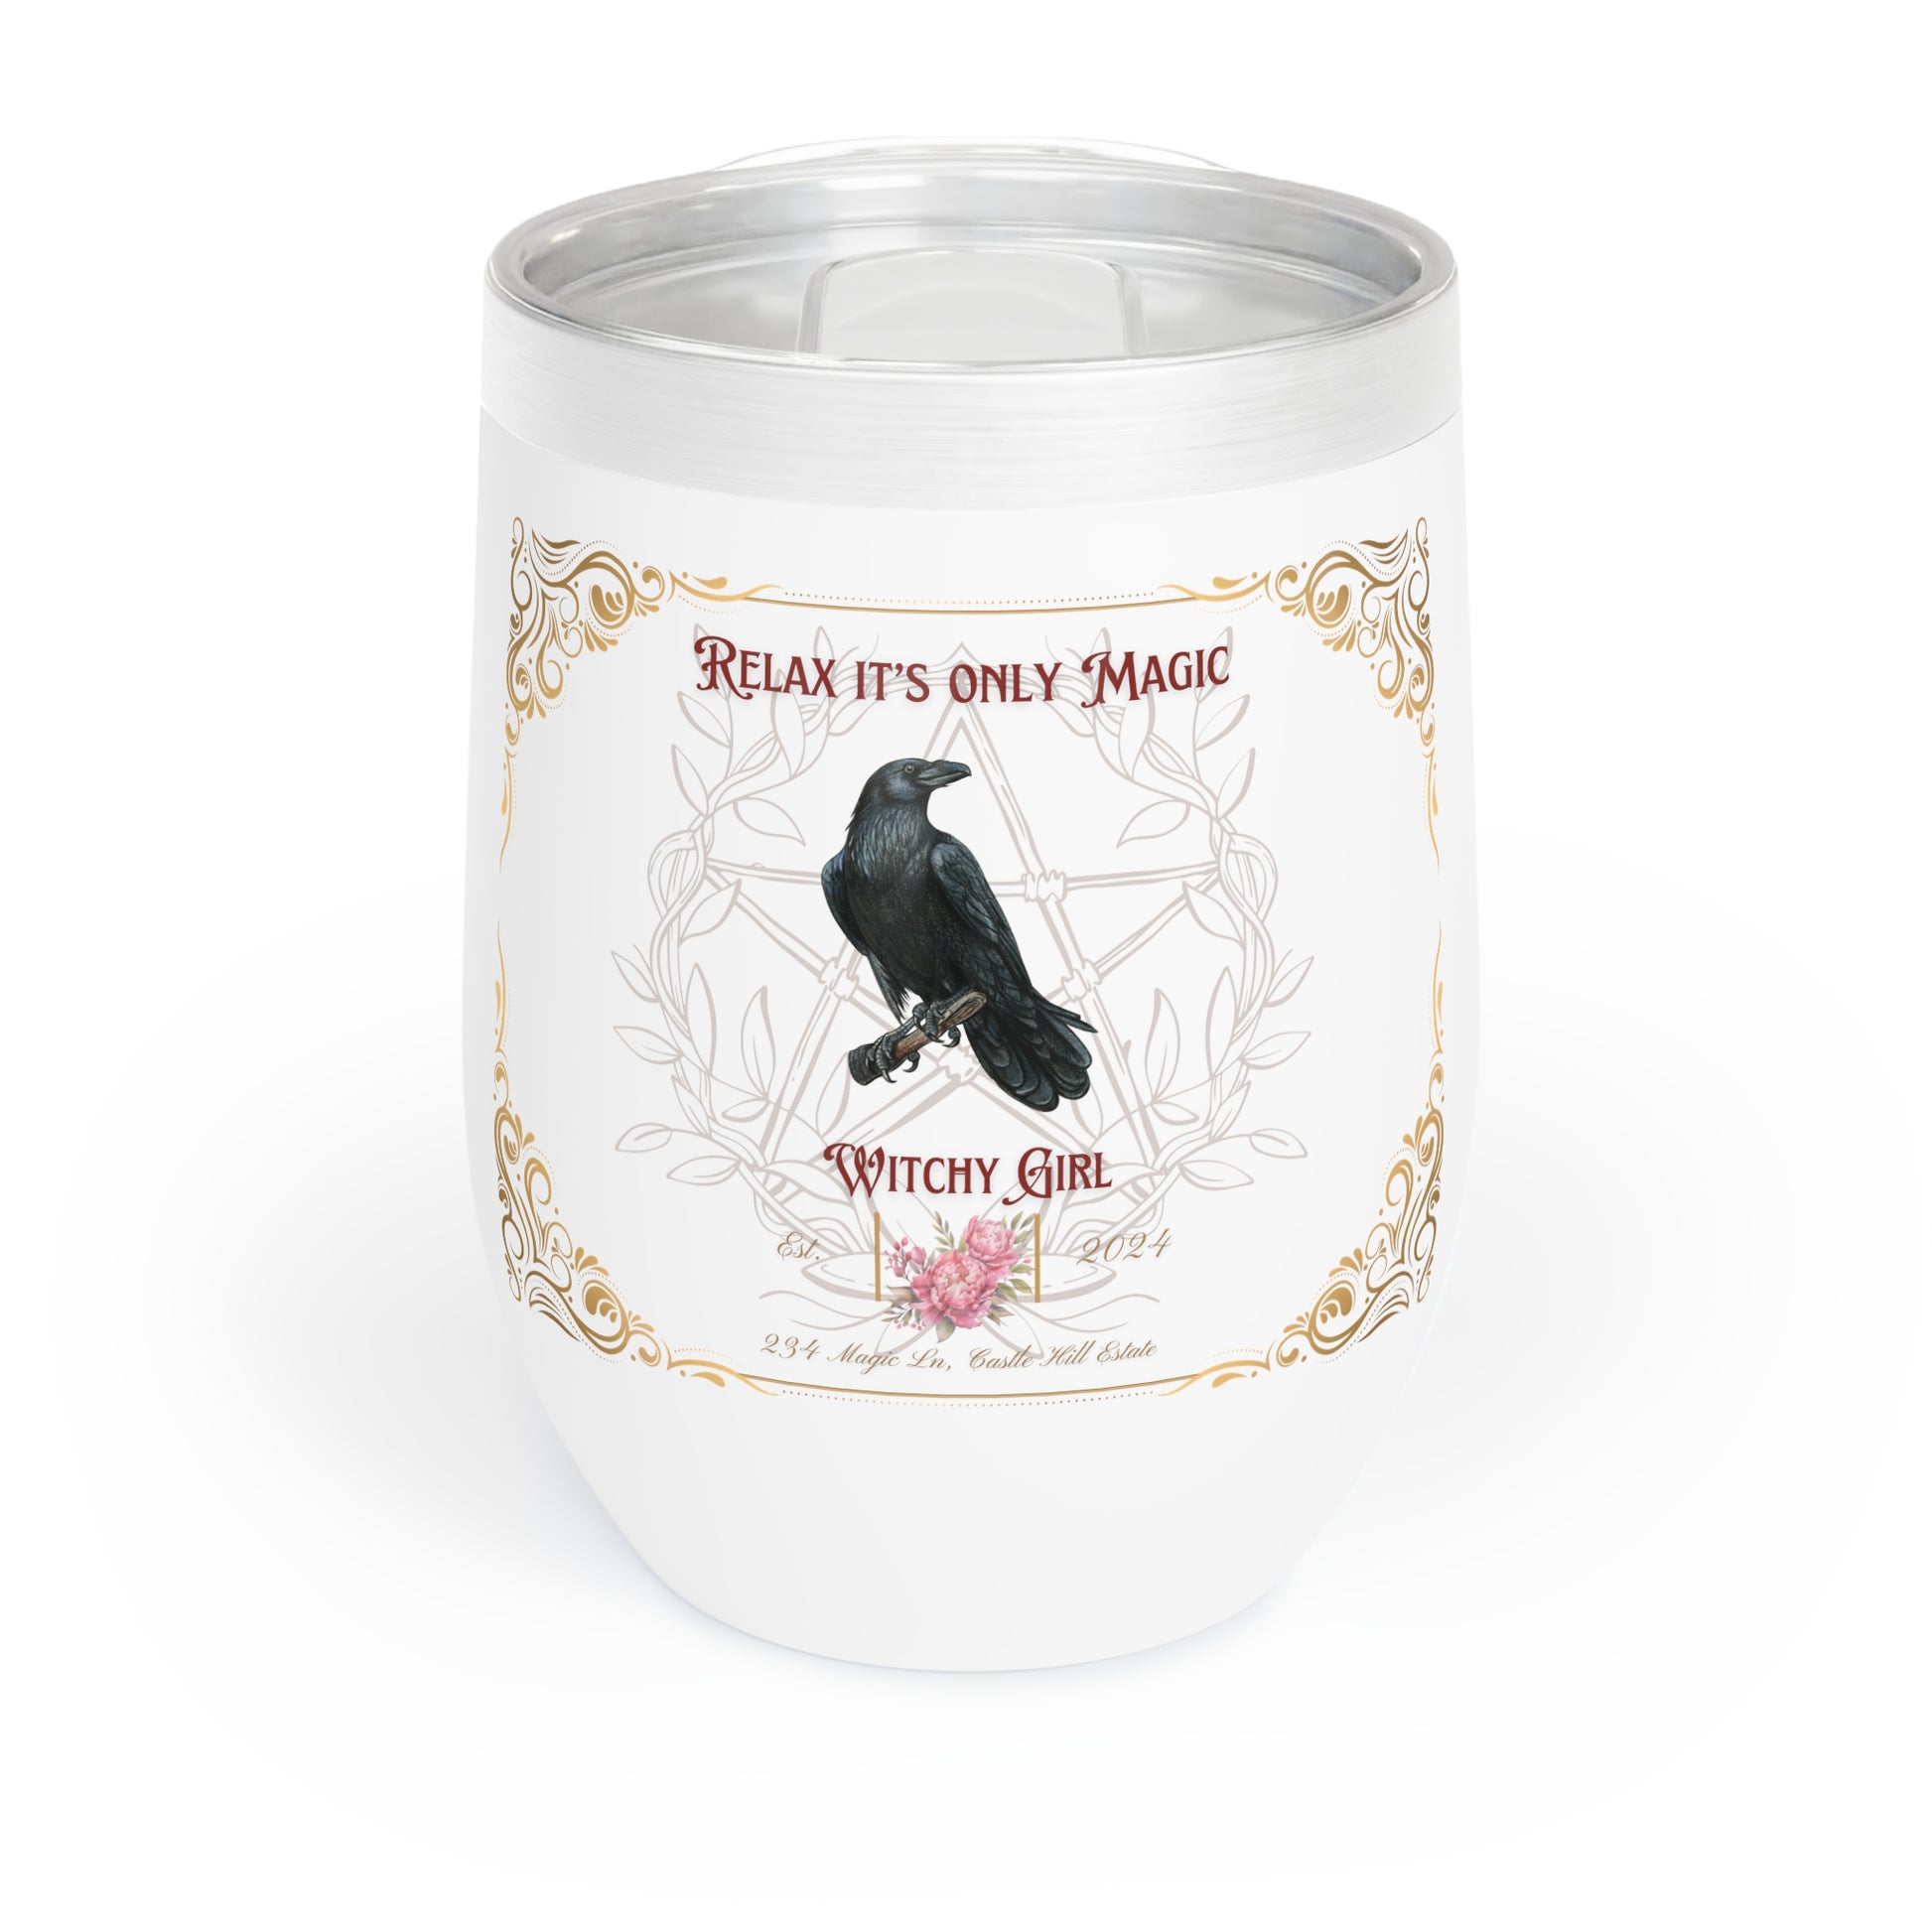 Relax It's Only Magic Tumbler 20oz, Witchy Tumbler, Wicca Tumbler - The Witchy Gypsy